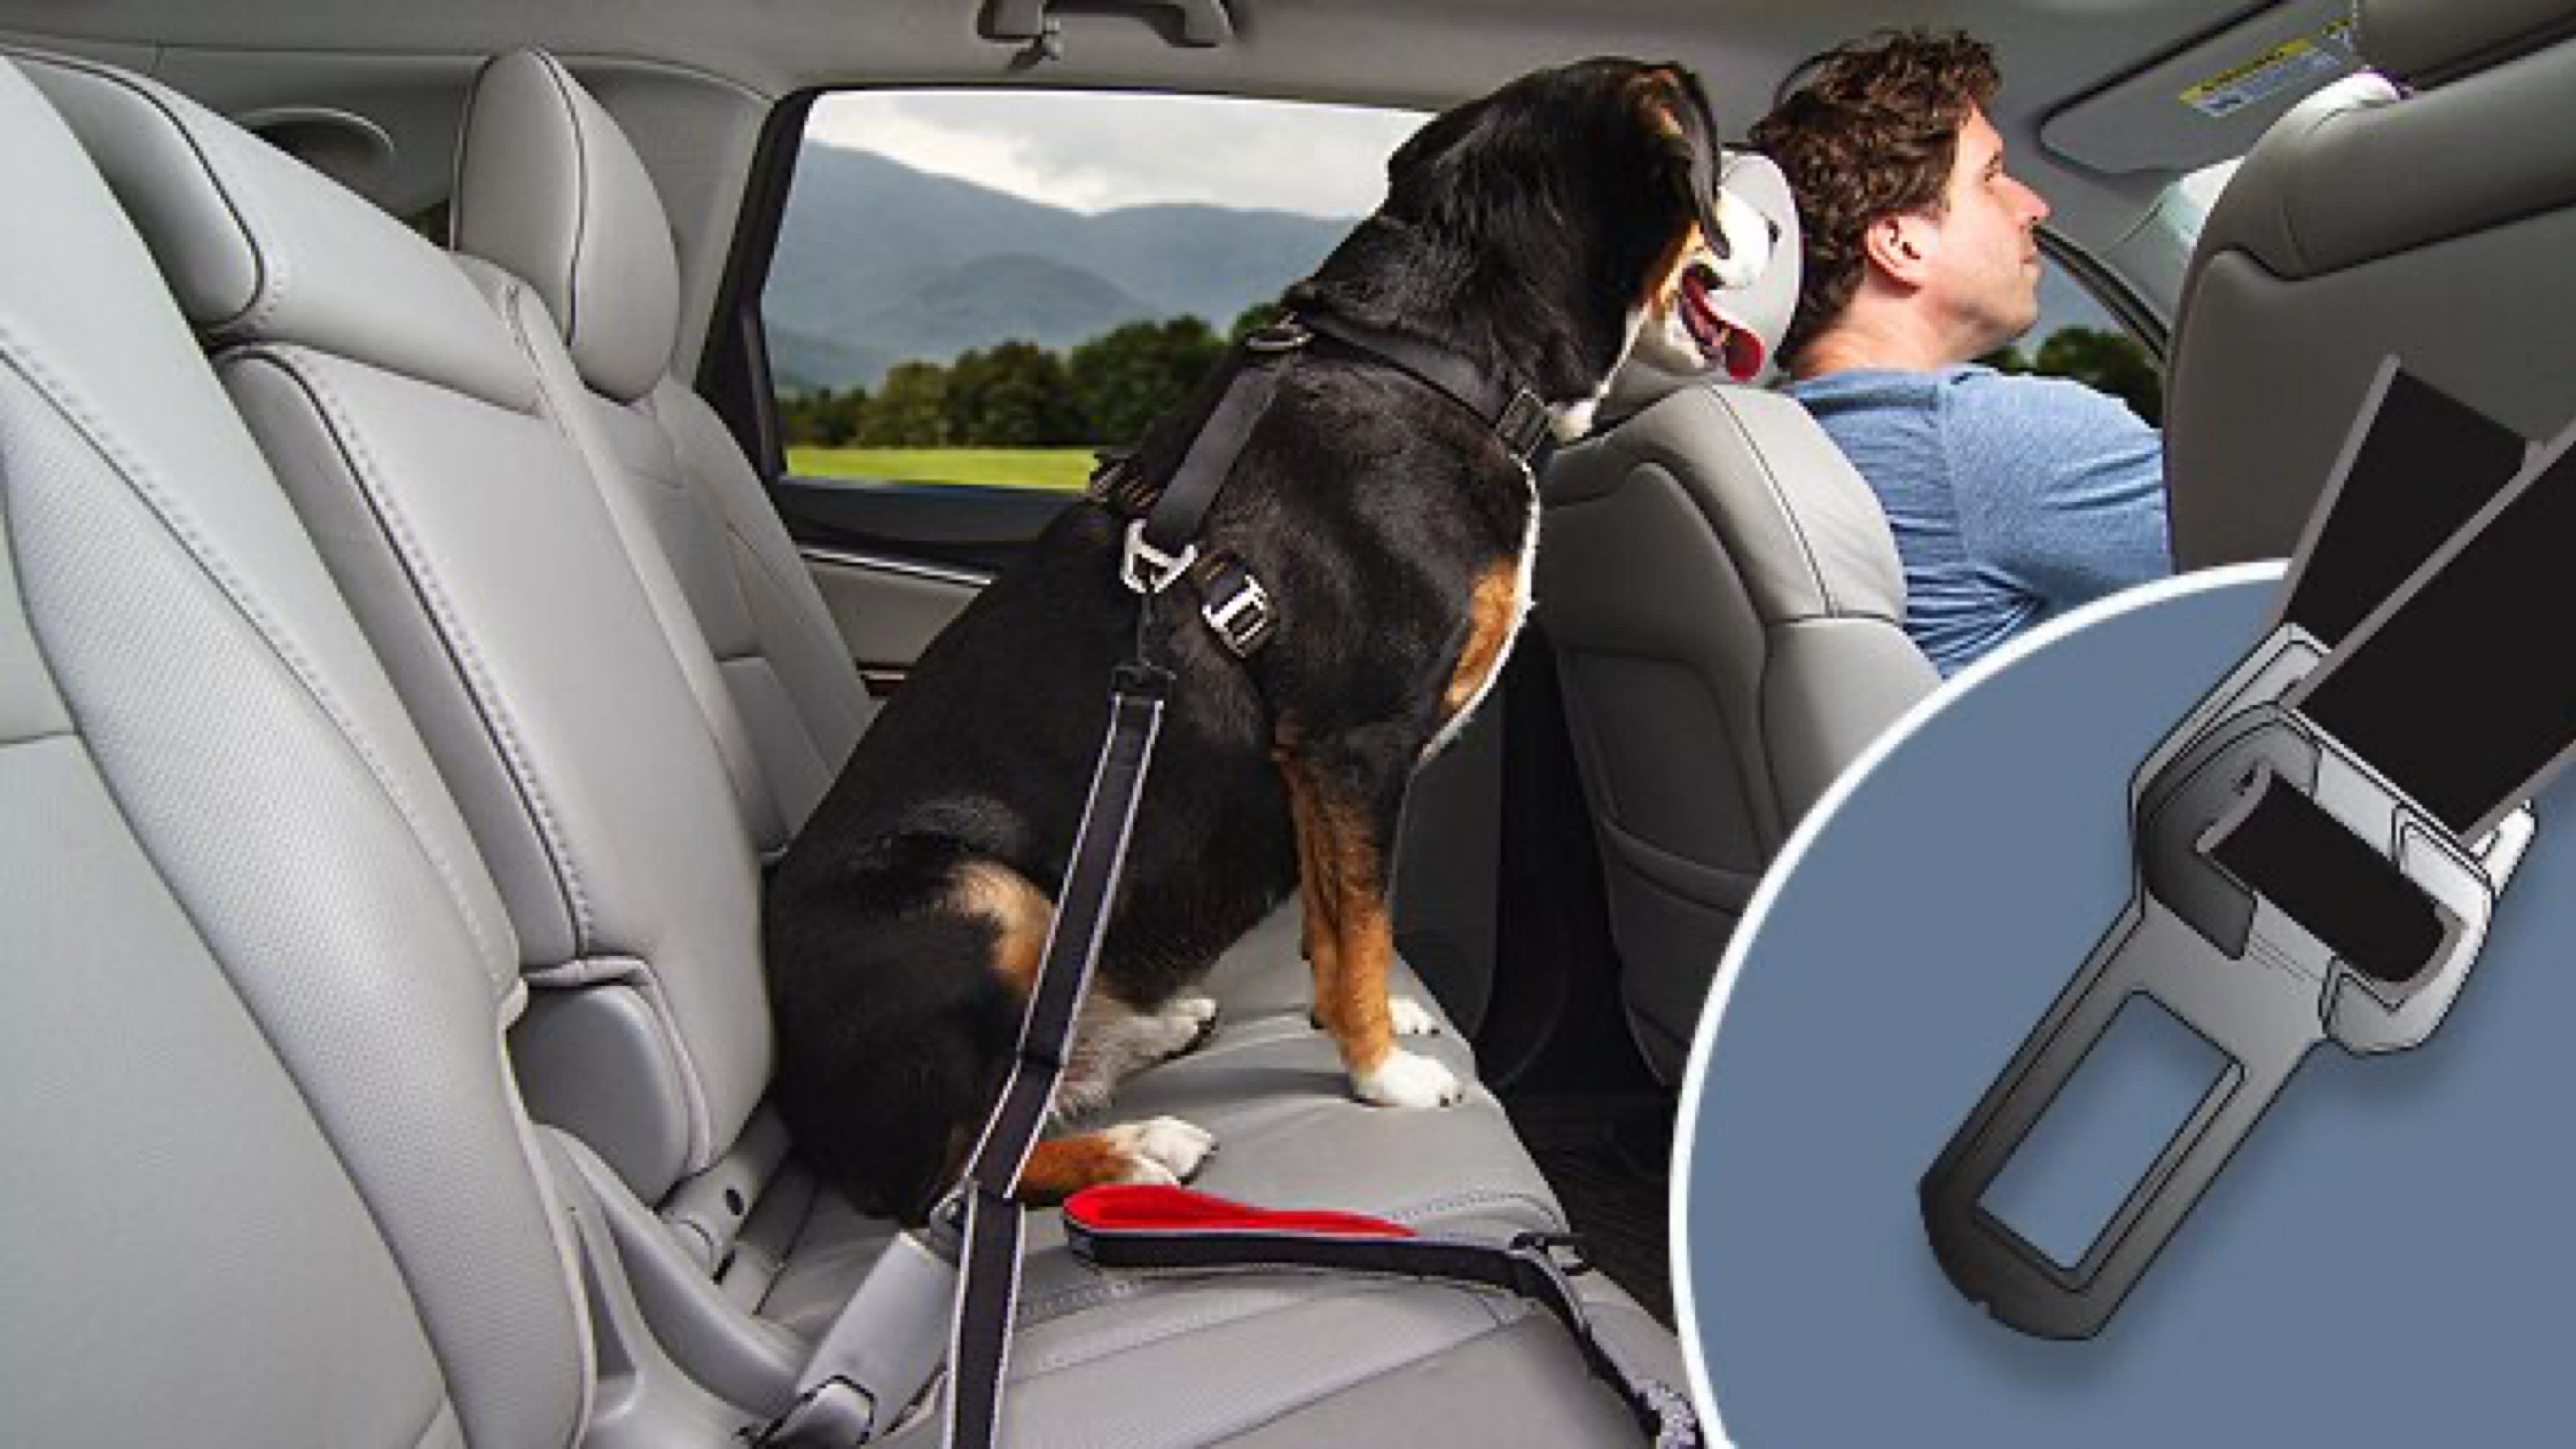 leash attachment that buckles your dog into the backseat so they don't slide around